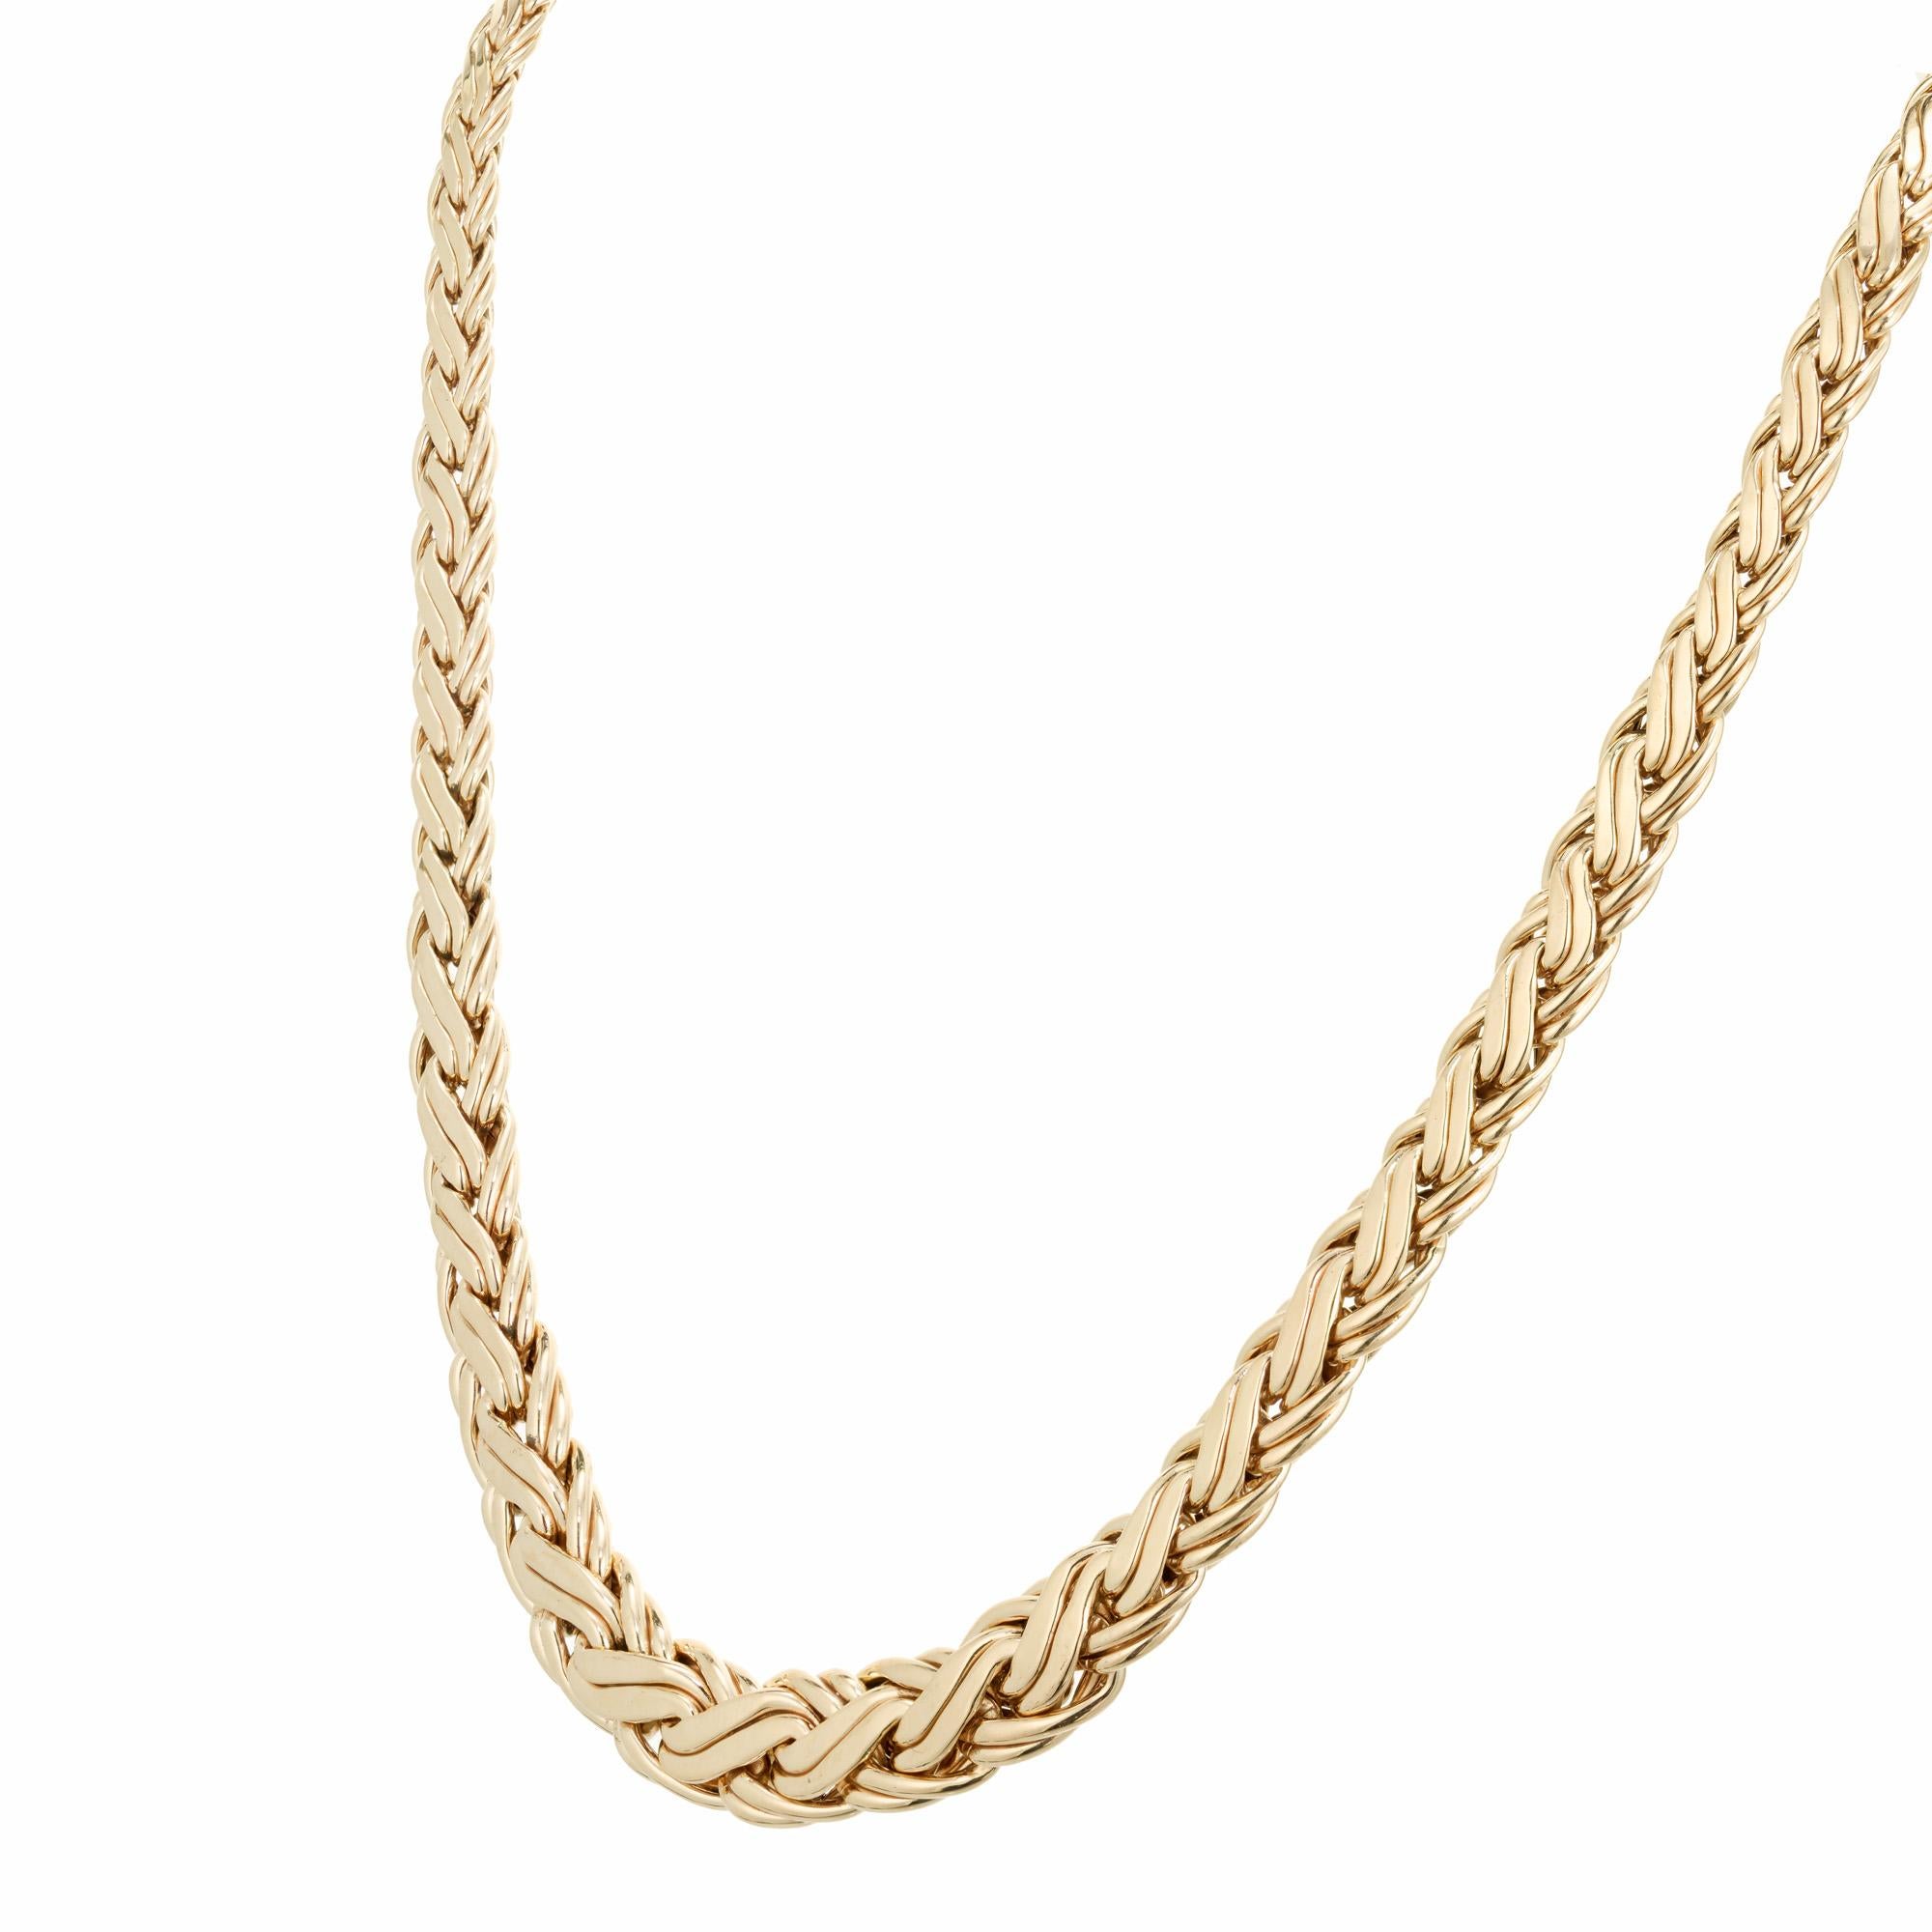 Beautiful 1980's Tiffany & Co graduated wheat chain design necklace. 16.25 inches in length. 

14k yellow gold 
Stamped: 585
Hallmark: Tiffany & Co
30.3 grams
Chain: 16.25 Inches
Width: 5-10mm
Thickness/depth: 2.6 -5.3mm
